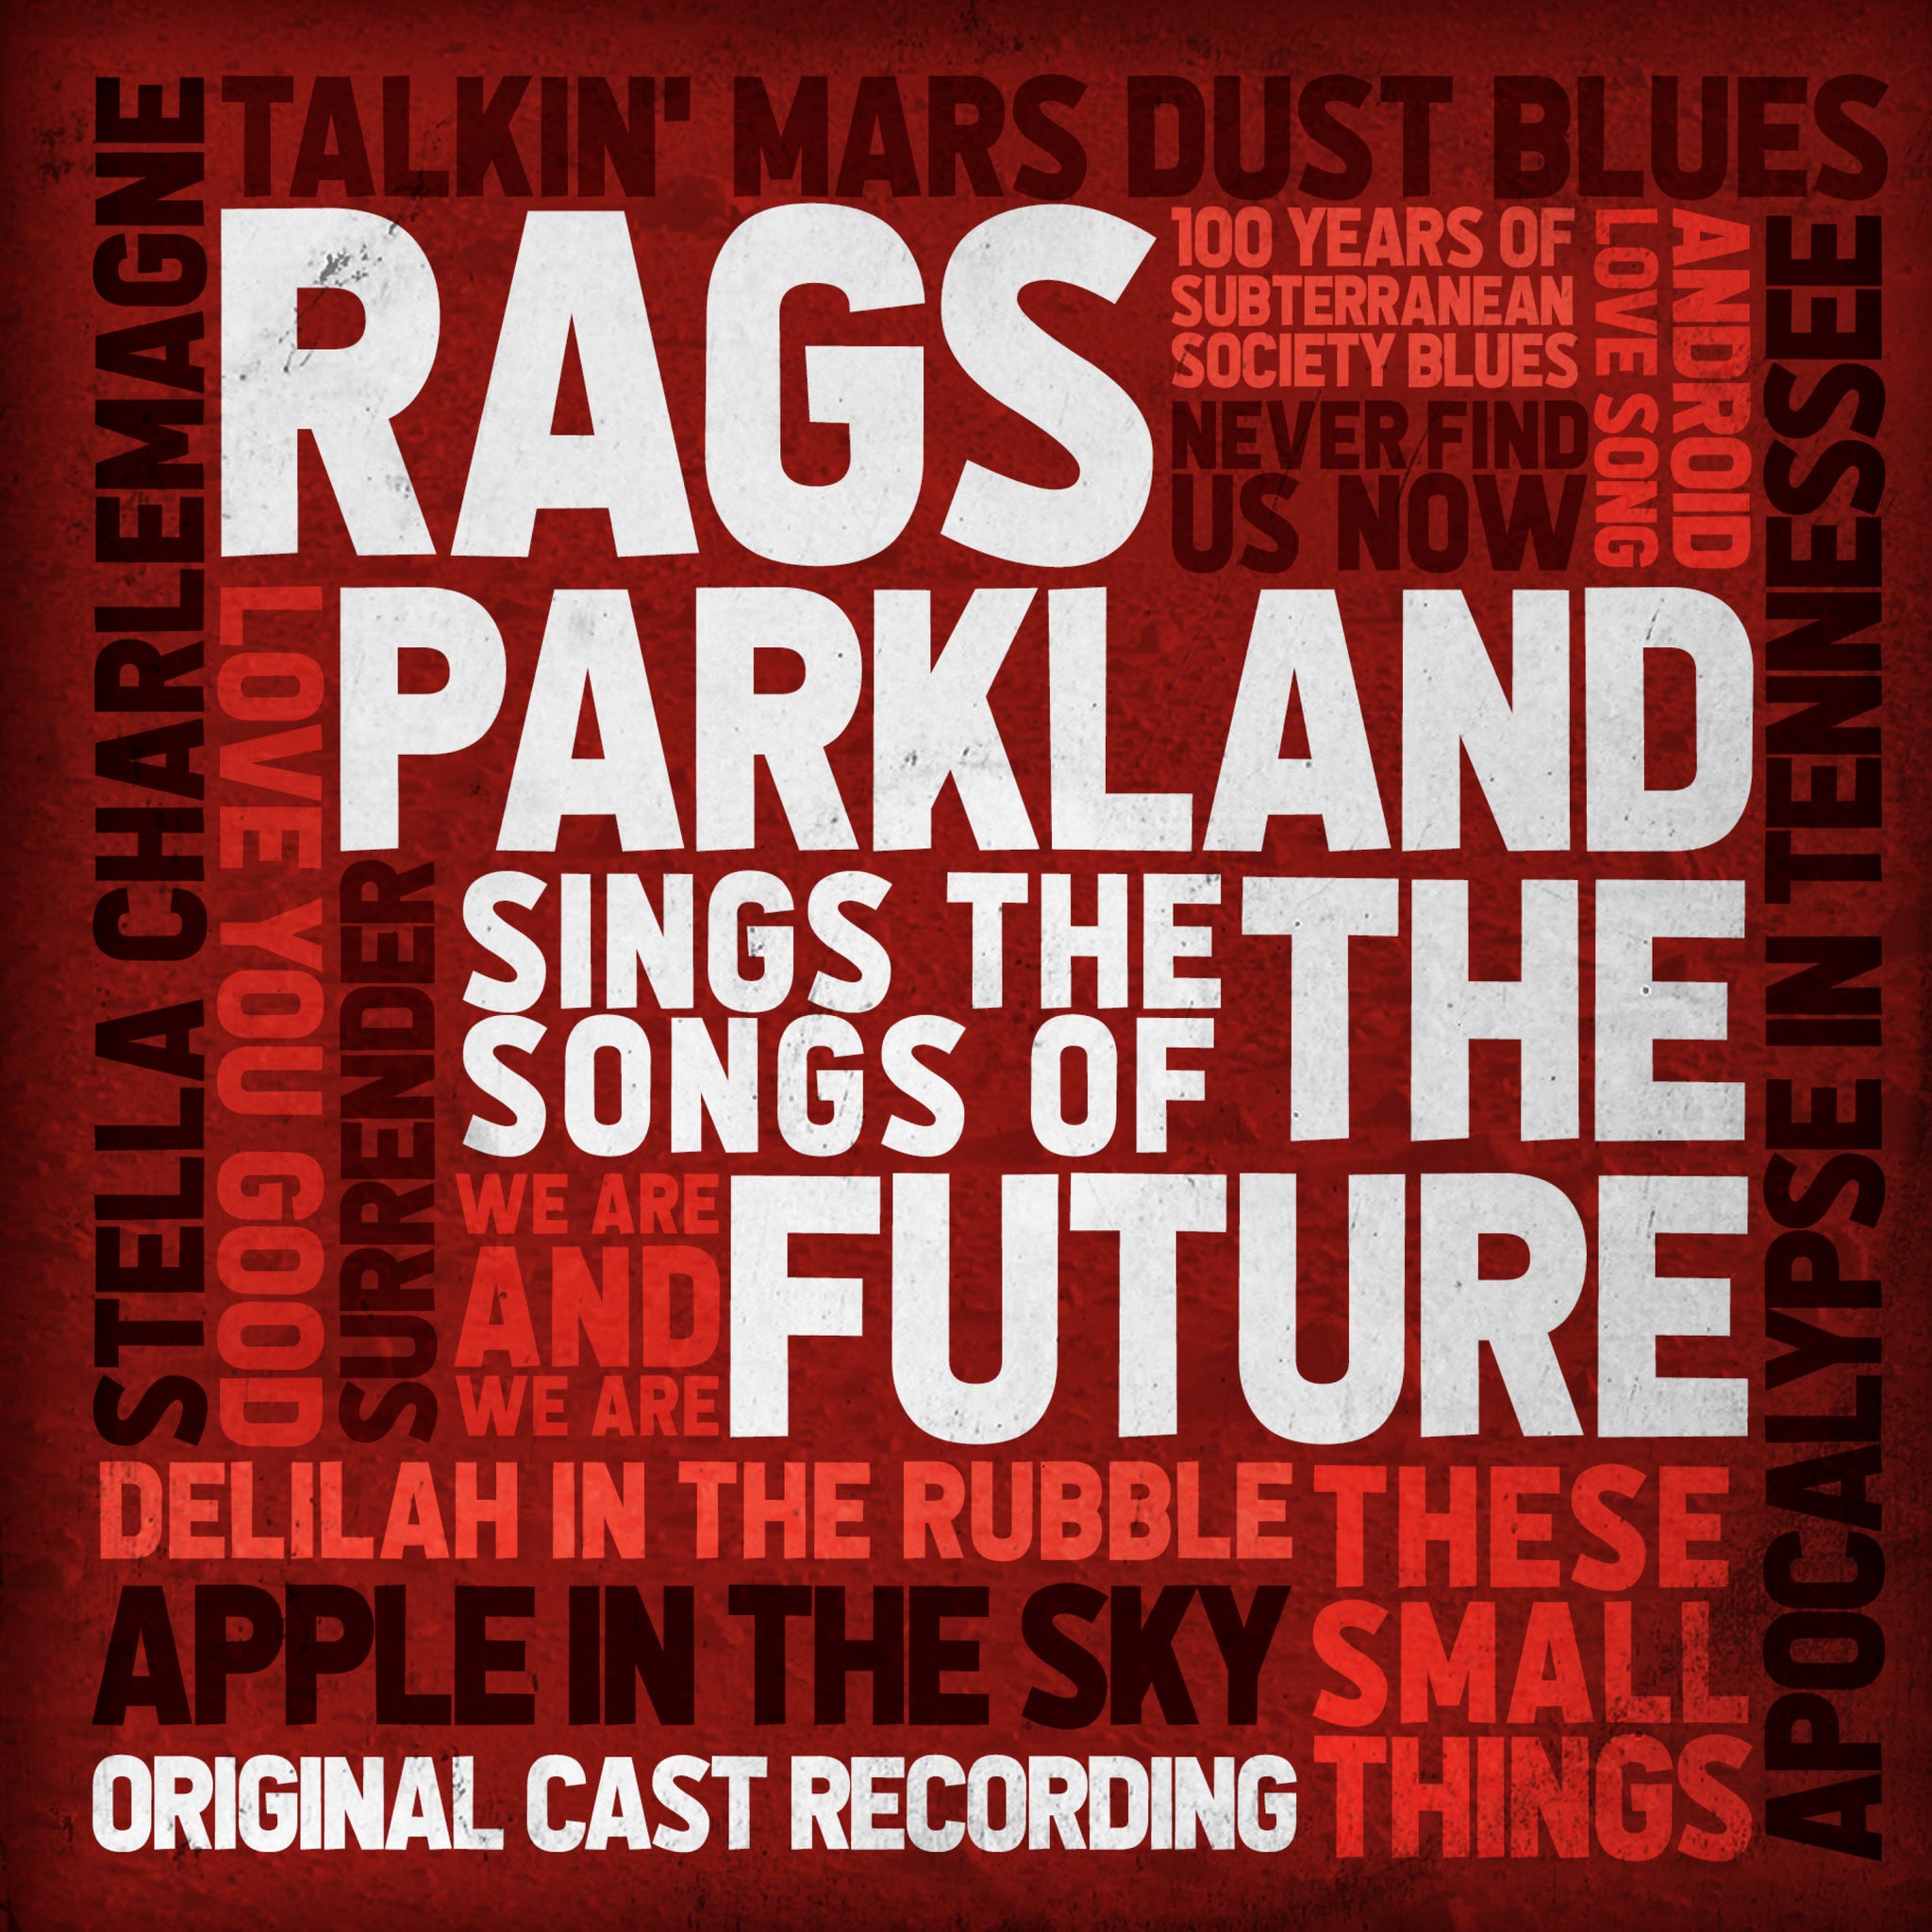 Rags Parkland Sings the Songs of The Future (Original Cast Recording) [CD]